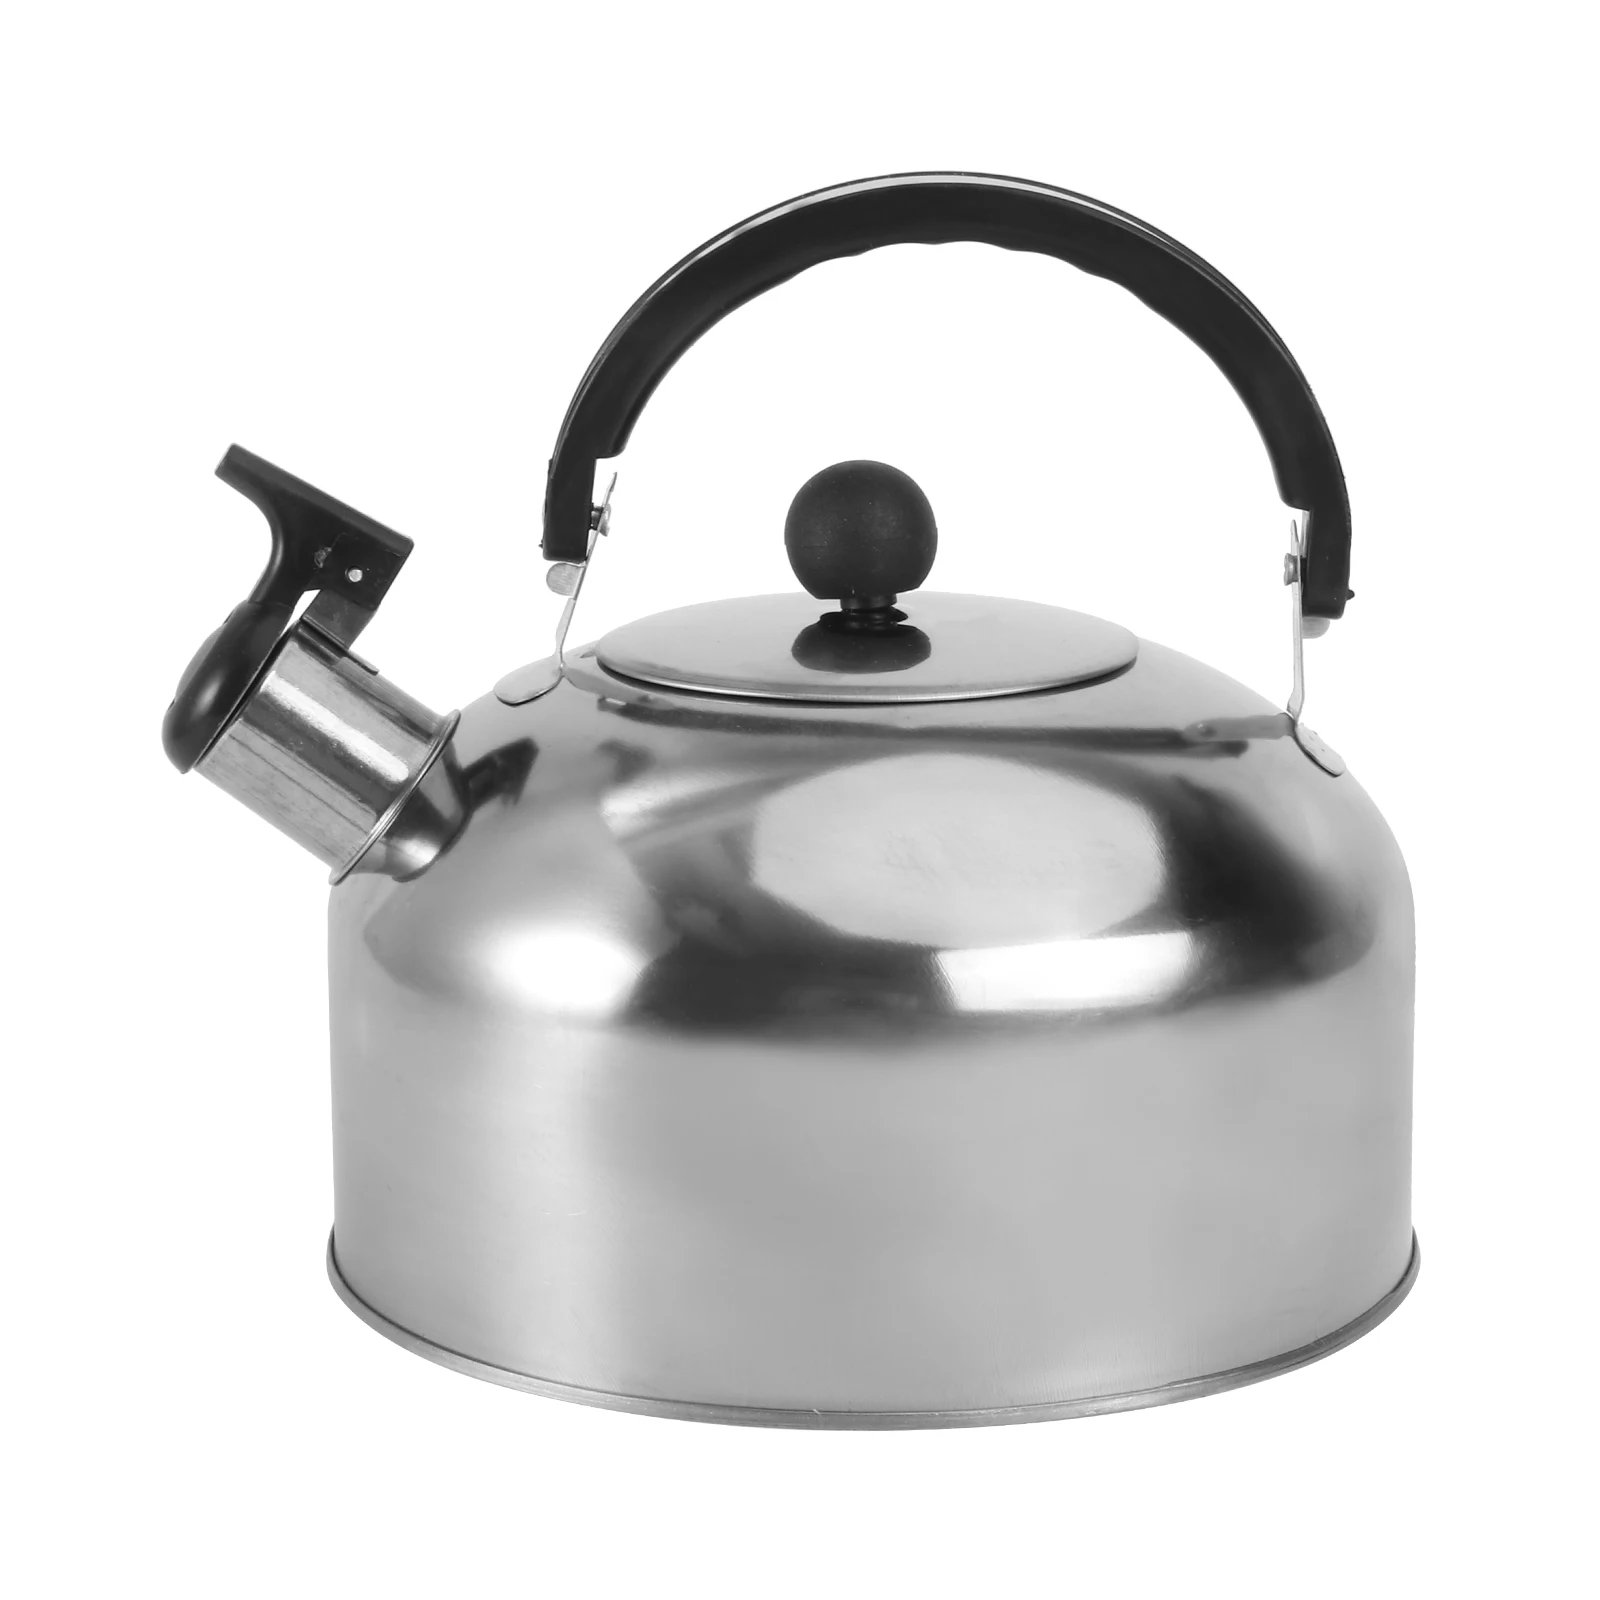 

Steel Kettle Bottom Flat Gas Kettle Kitchenware Teapot For Stainless Water Stove Whistling Induction Cooker((about